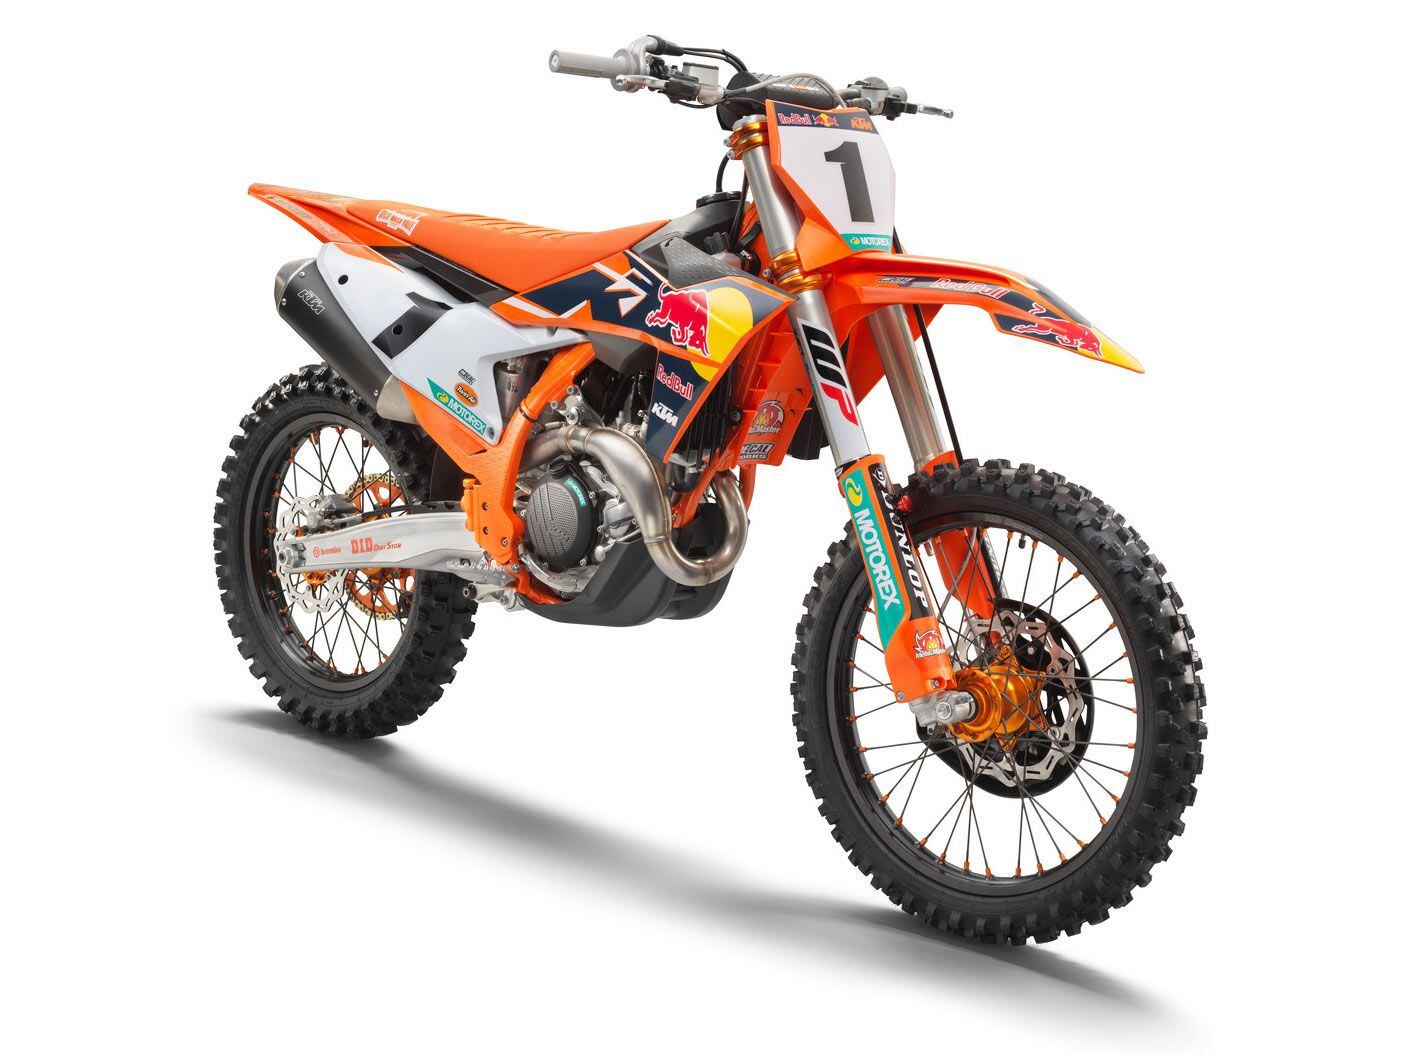 2022 KTM 450 SX-F Factory Edition First Look